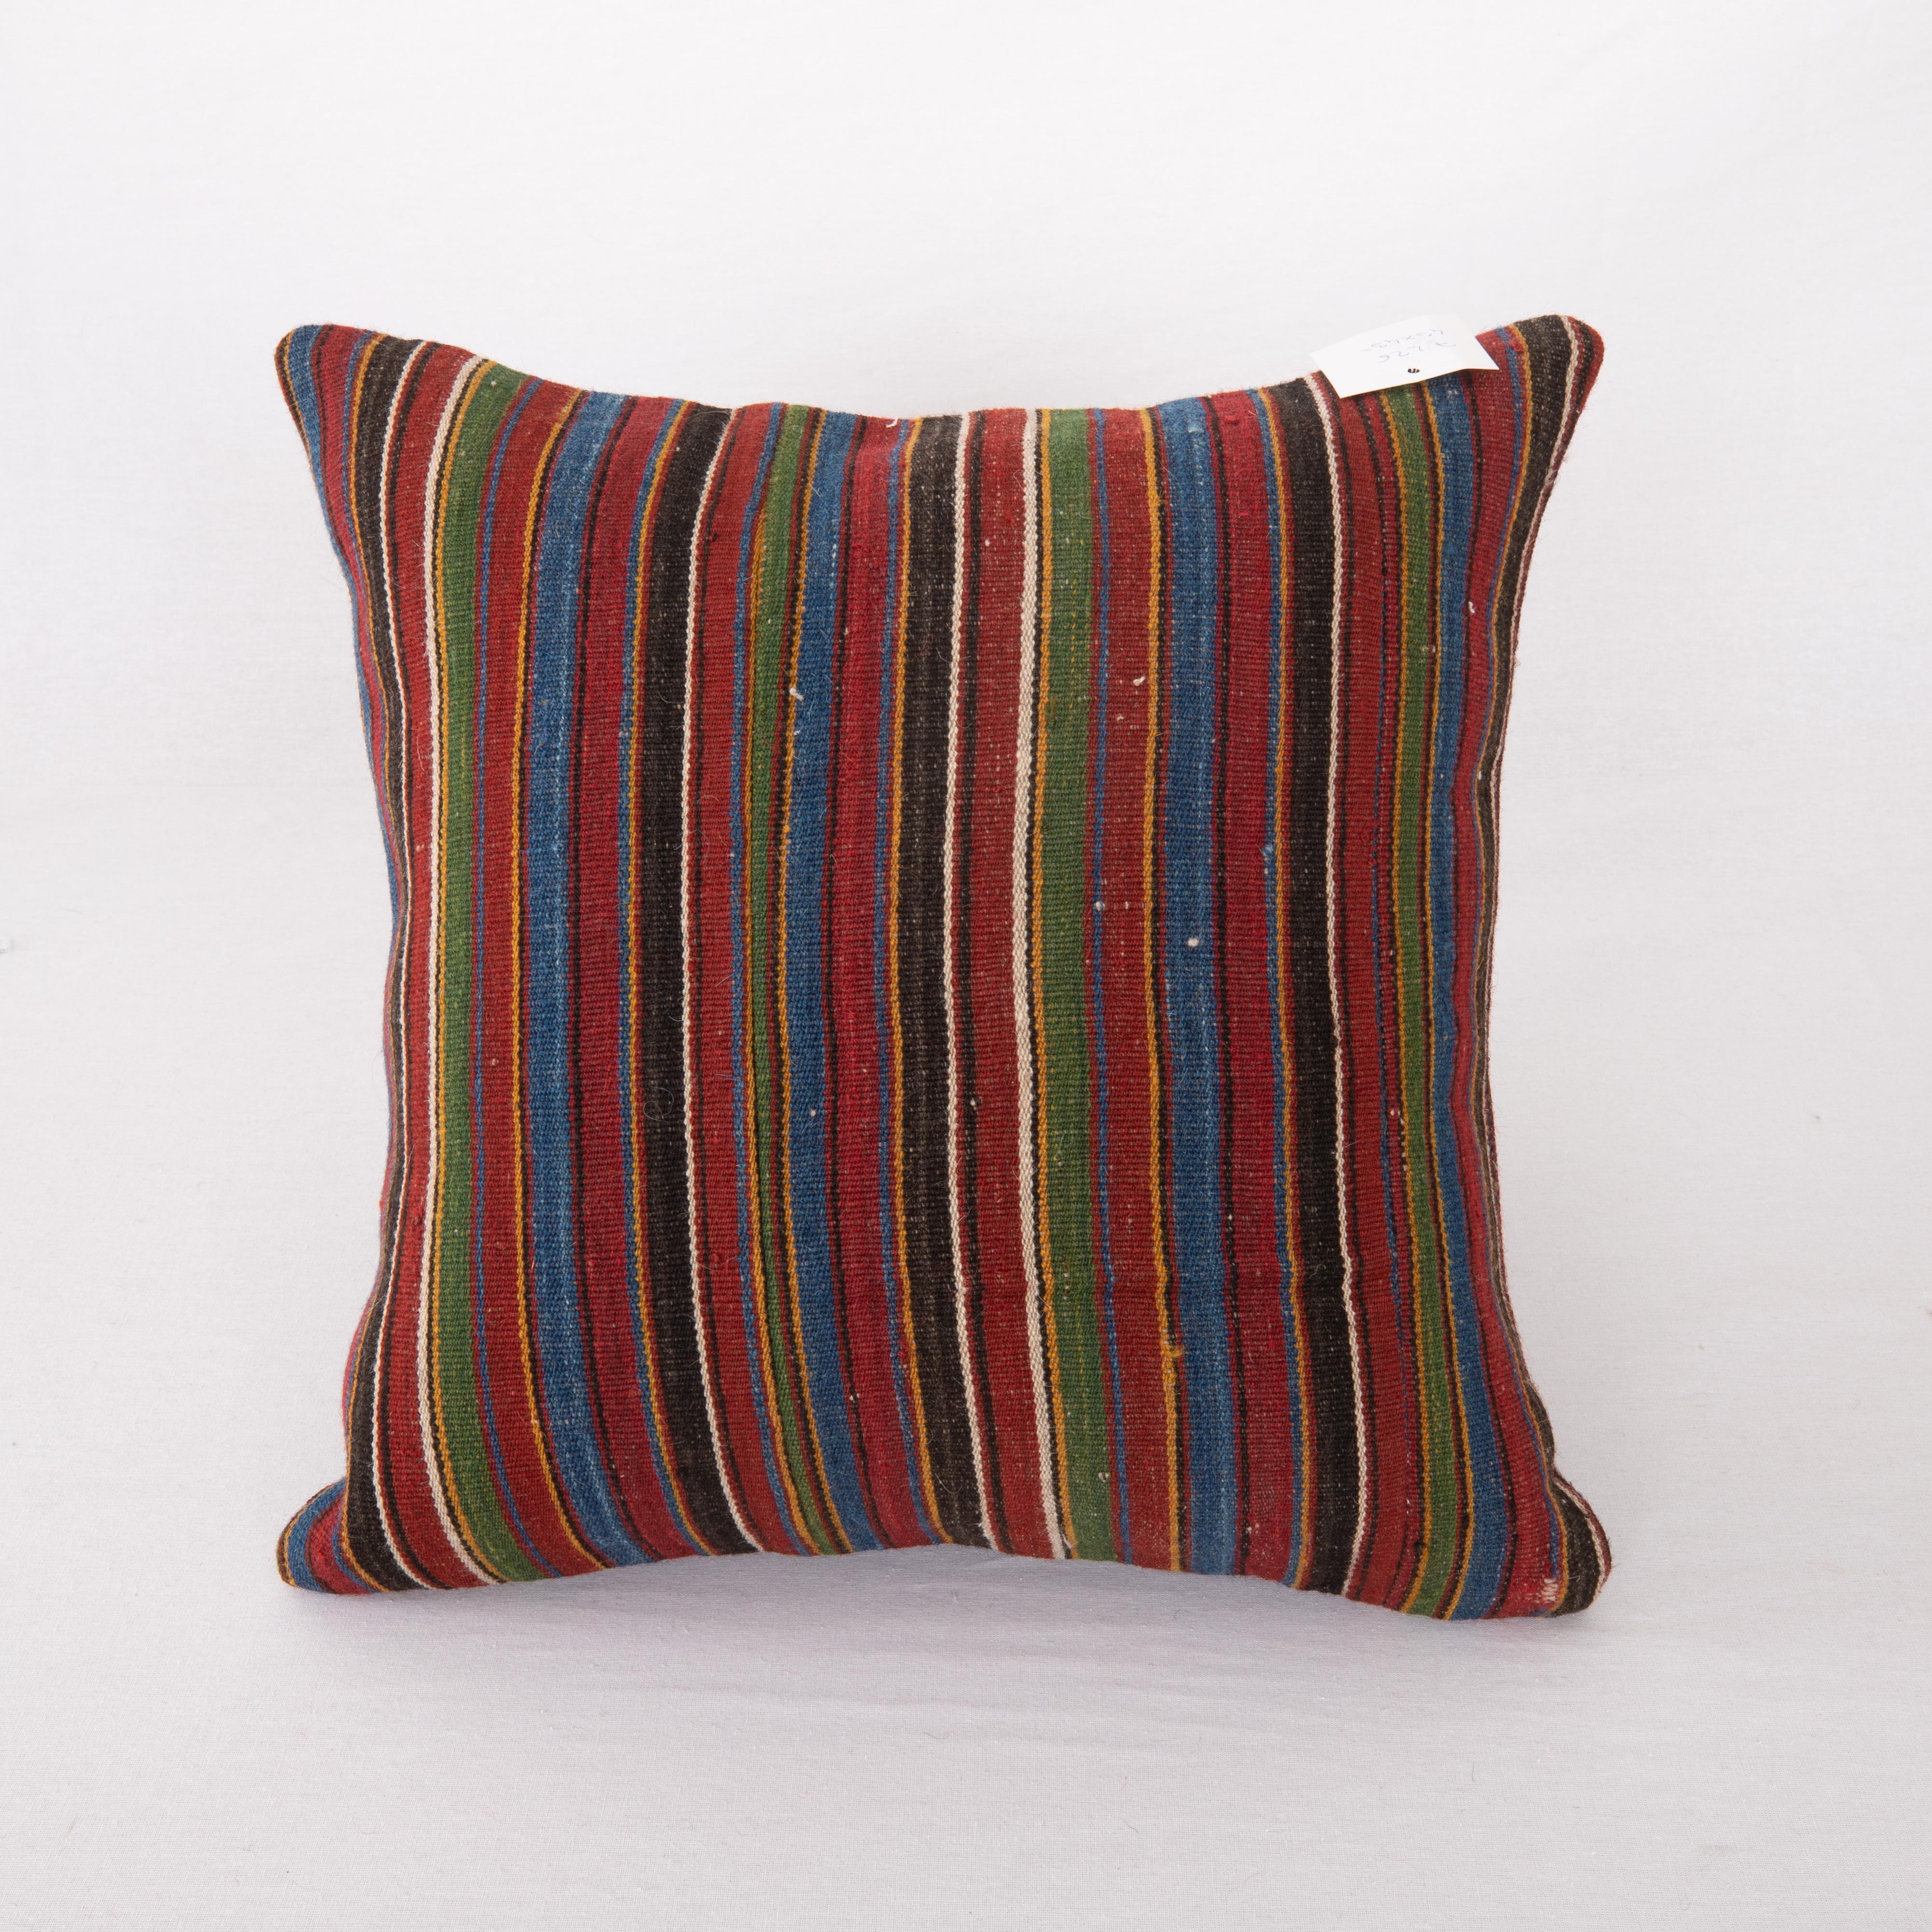 Hand-Woven Double Sided Kilim Pillow Cover Made From an Antique Kilim For Sale